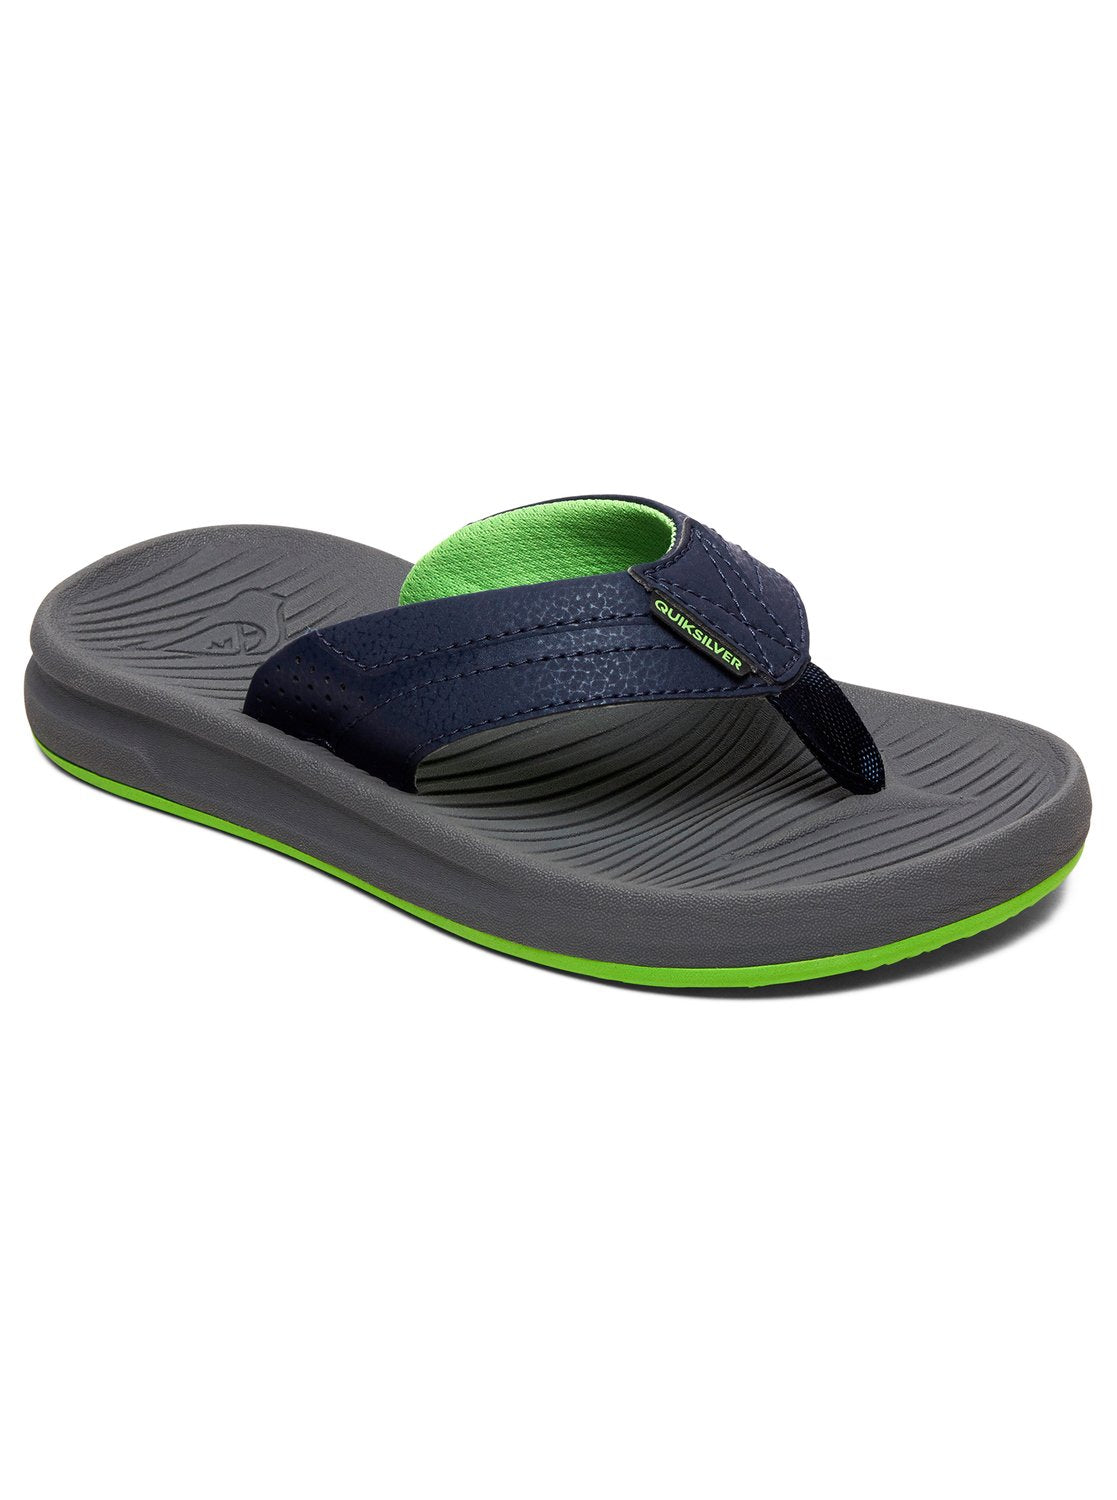 Quiksilver Oasis Youth Sandals XBSB-Blue-Grey-Blue 10 C